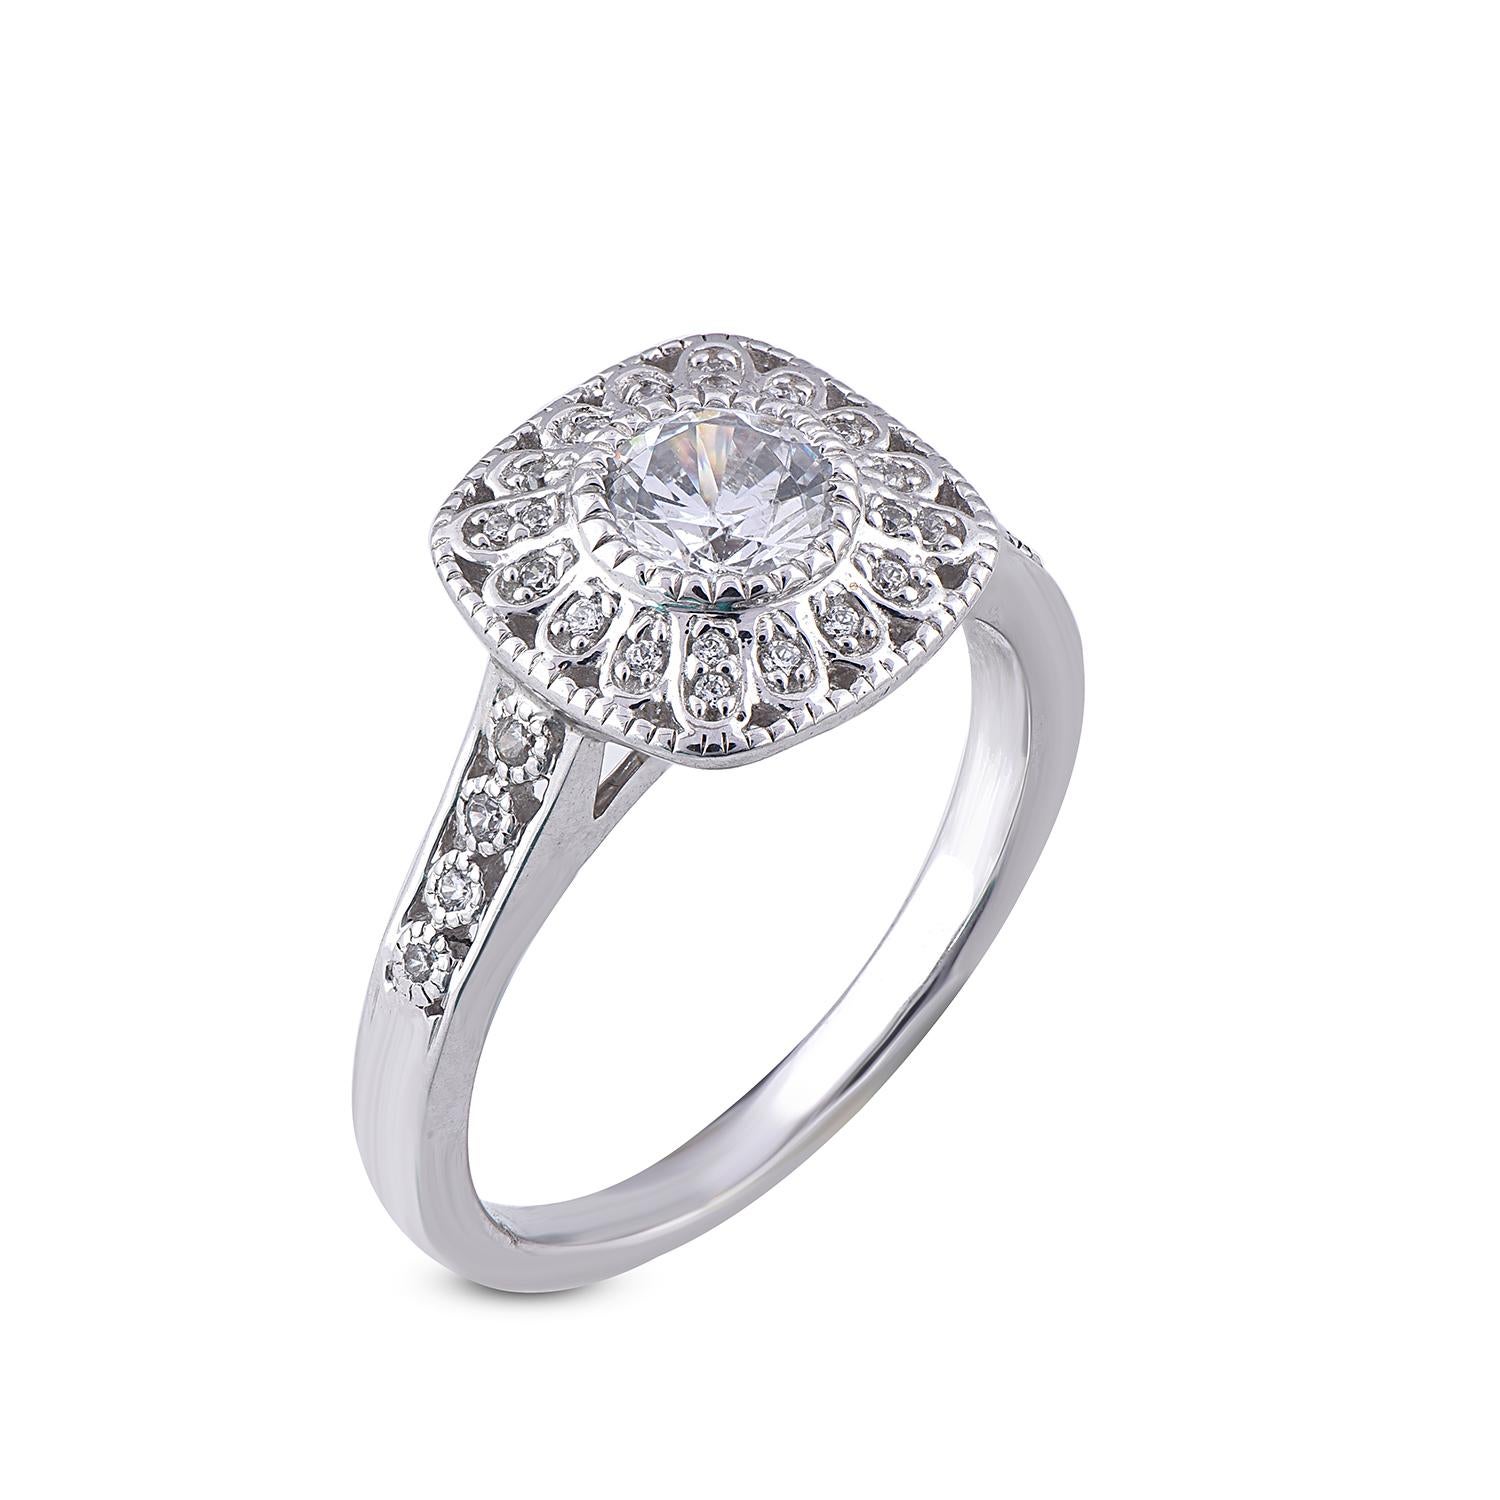 This Elegant Ring is embellished with 0.60ct center stone and 0.15ct of diamond on frame and shank with 29 diamonds in pave and bezel setting and crafted by our in-house experts in 18 Karat white gold. Diamonds are graded  G-H color and SI1-2